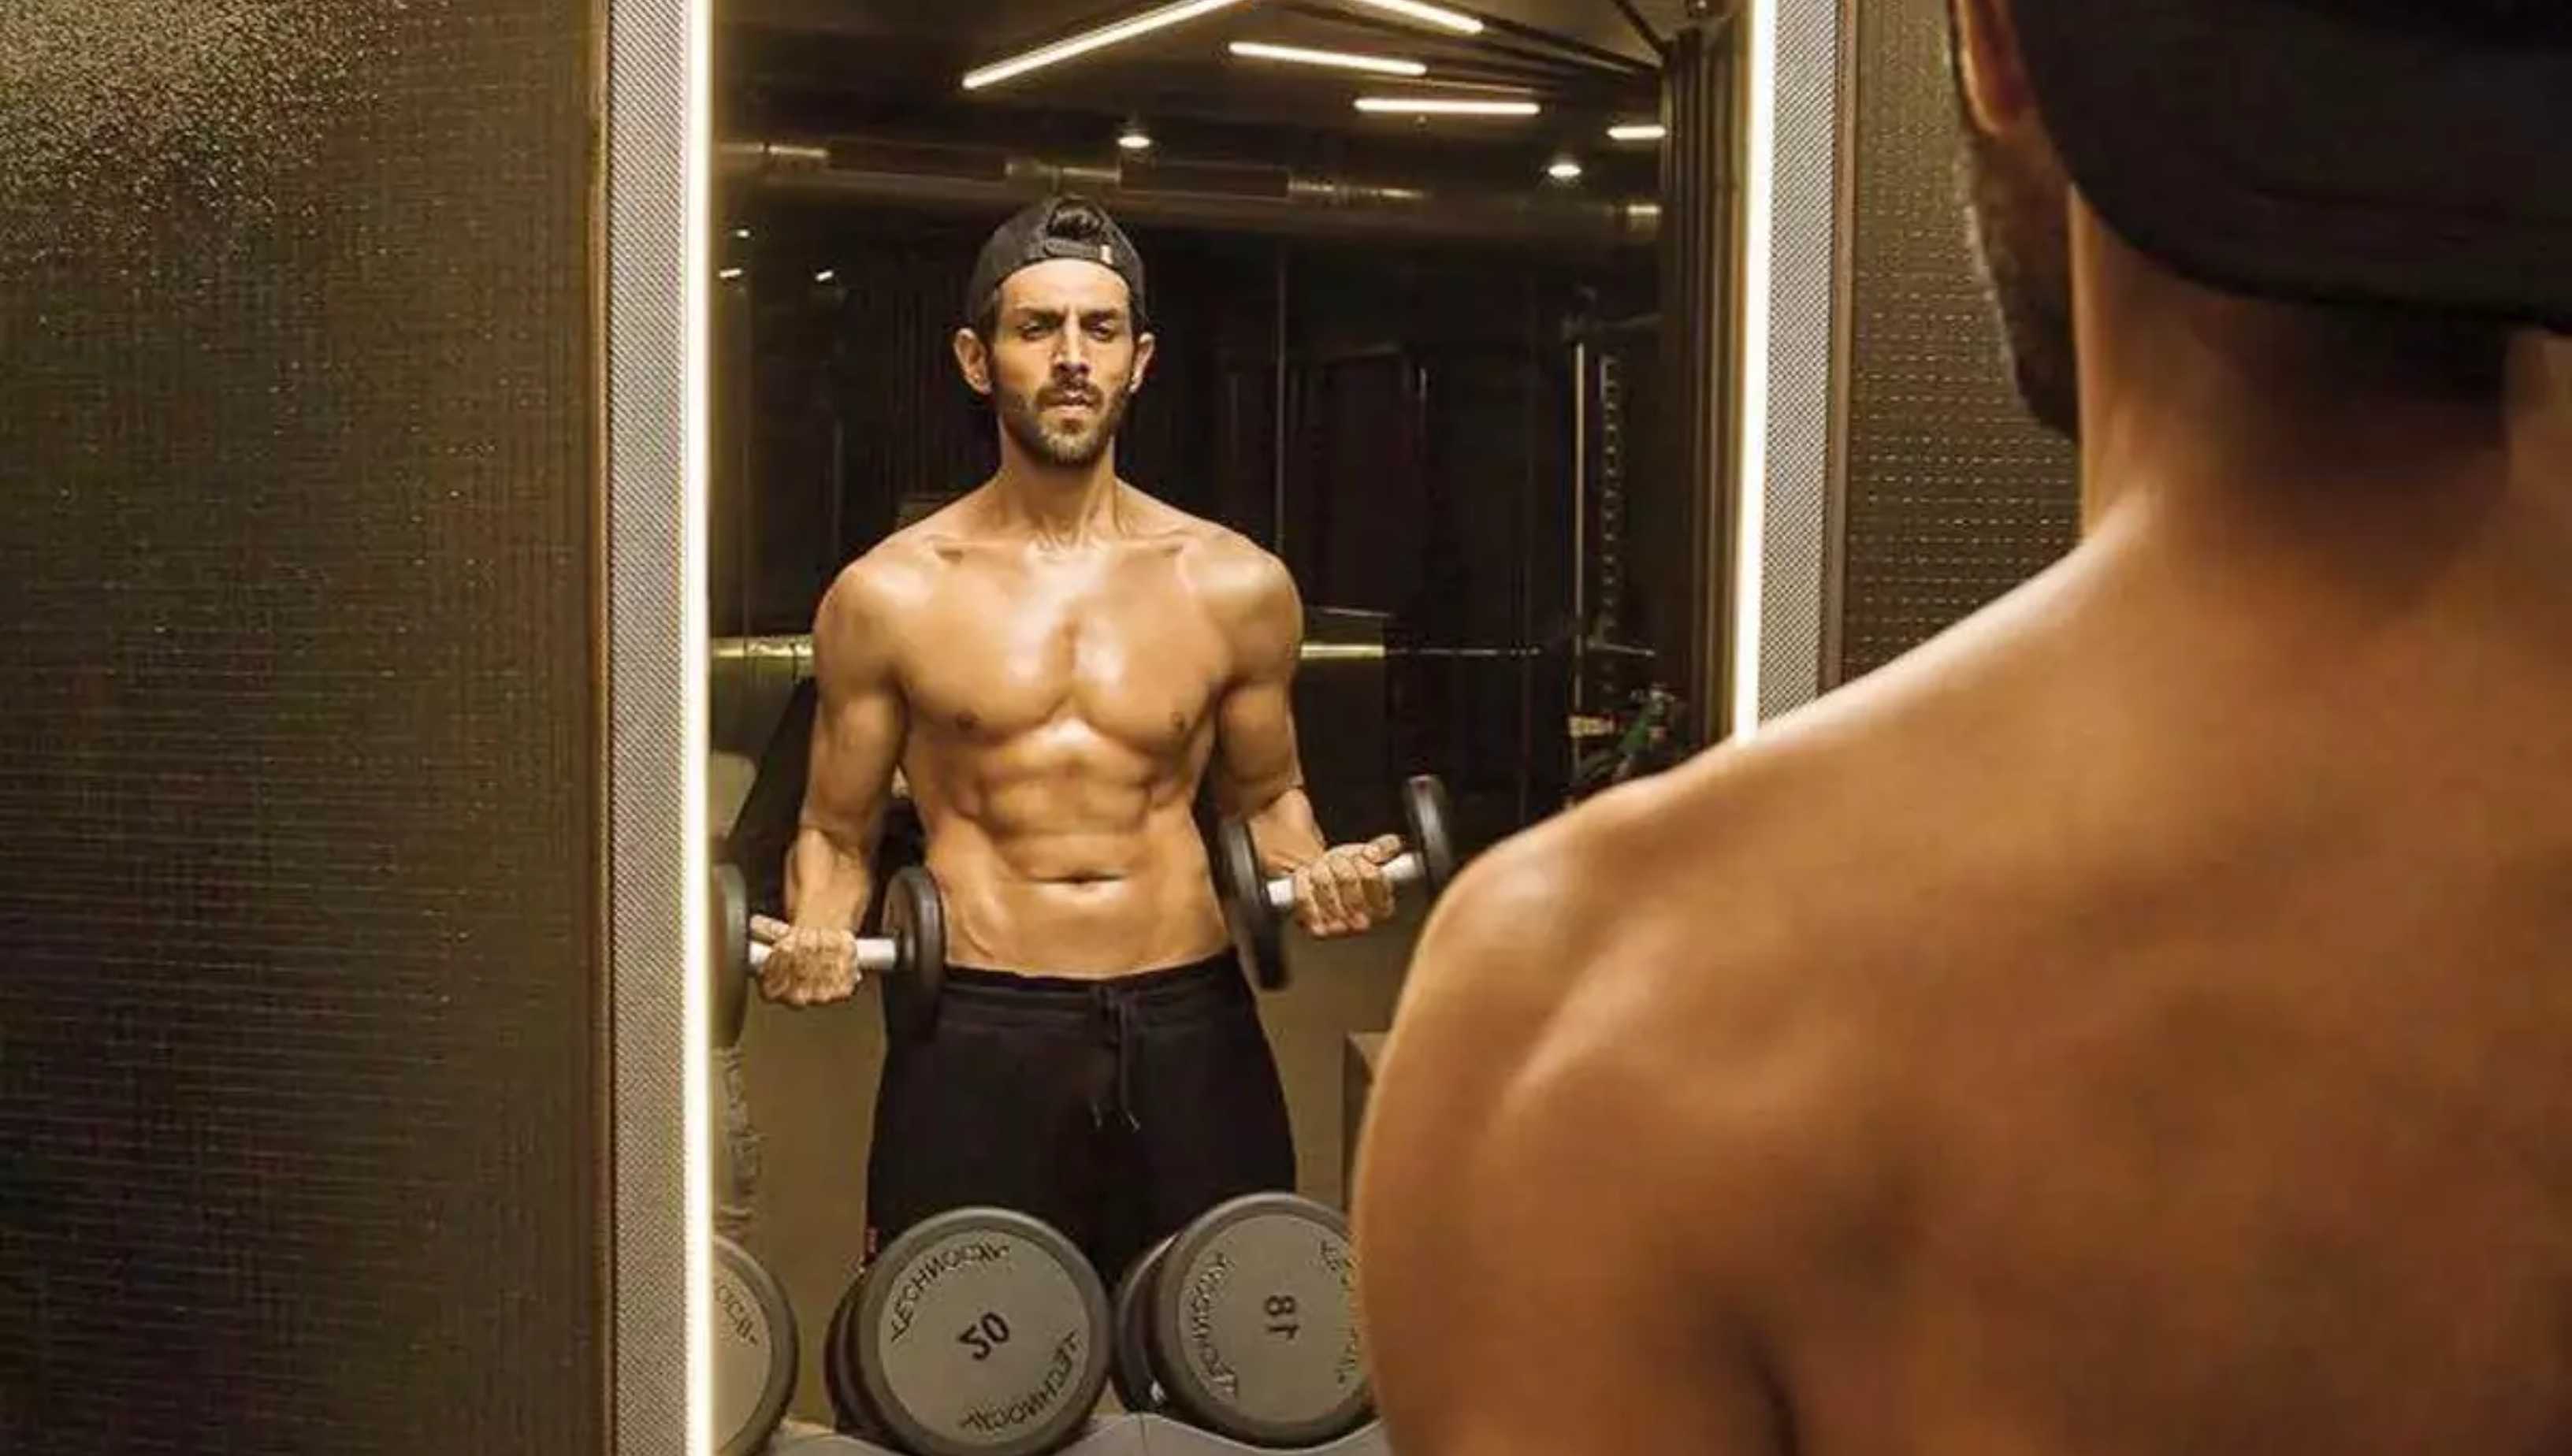 After a dentist, Kartik Aaryan is getting beefed up to play a boxer next? Here’s everything we know